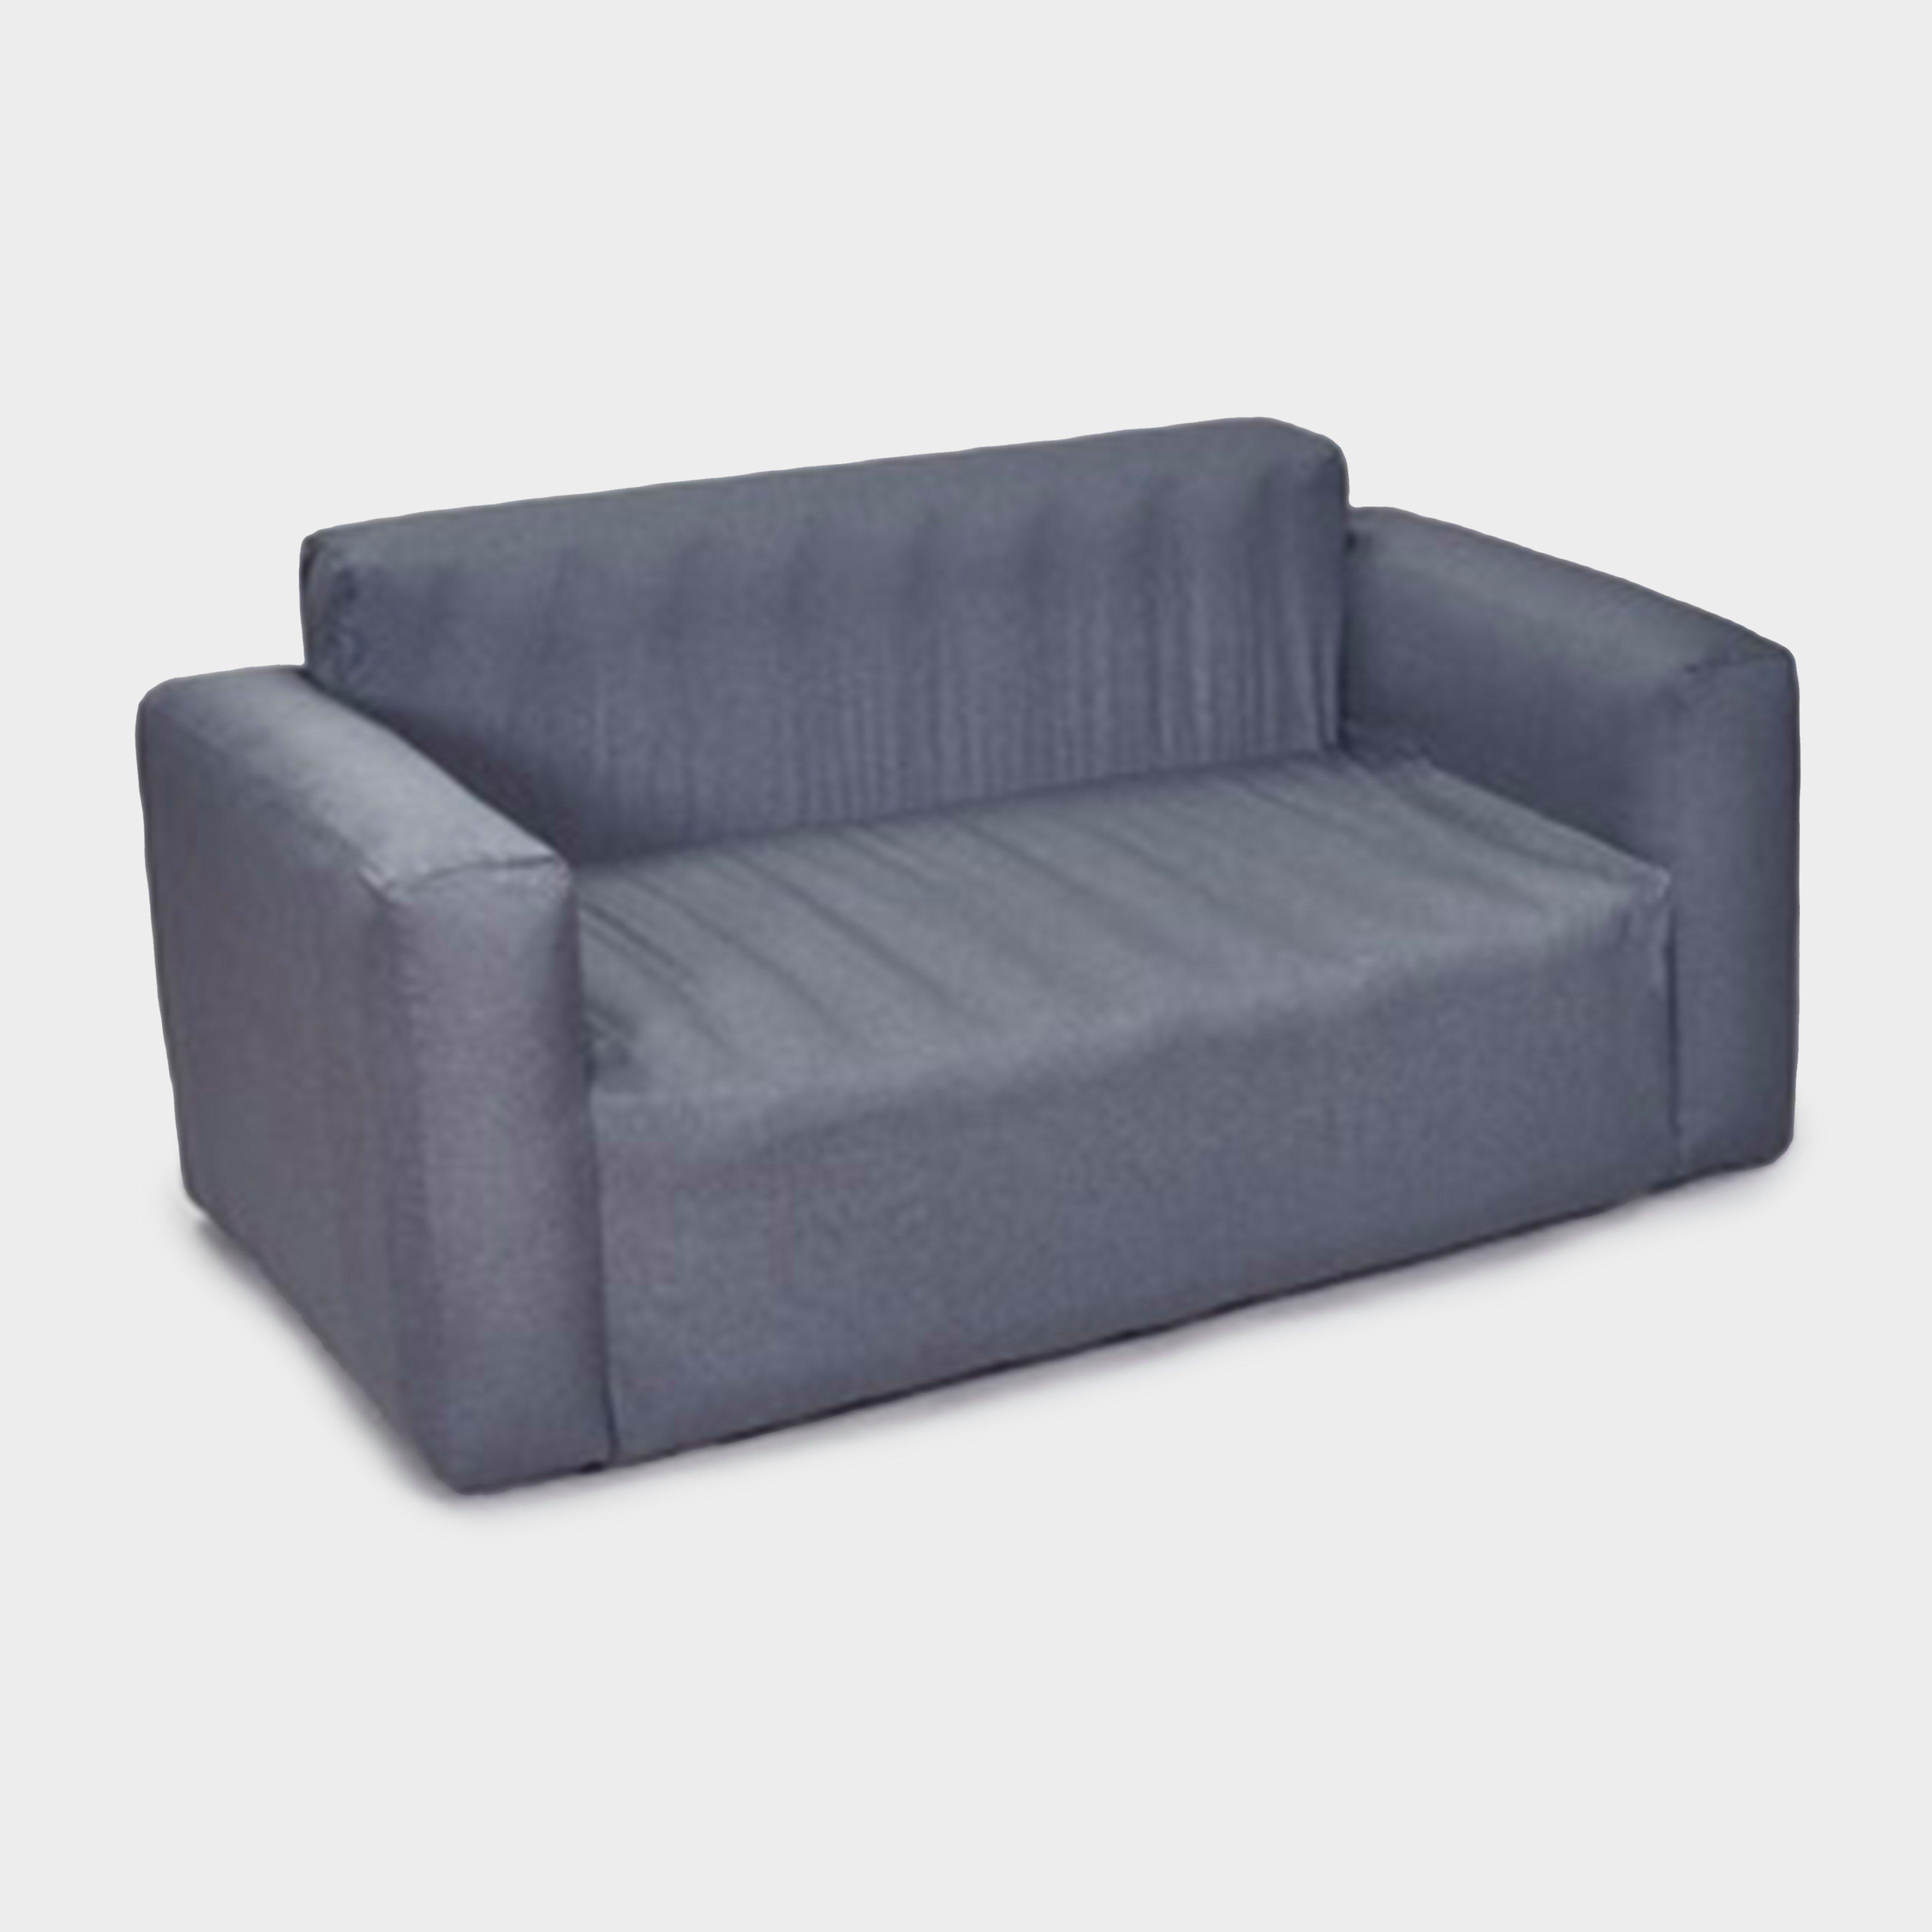  HI-GEAR Inflatable Two-Person Sofa, Grey